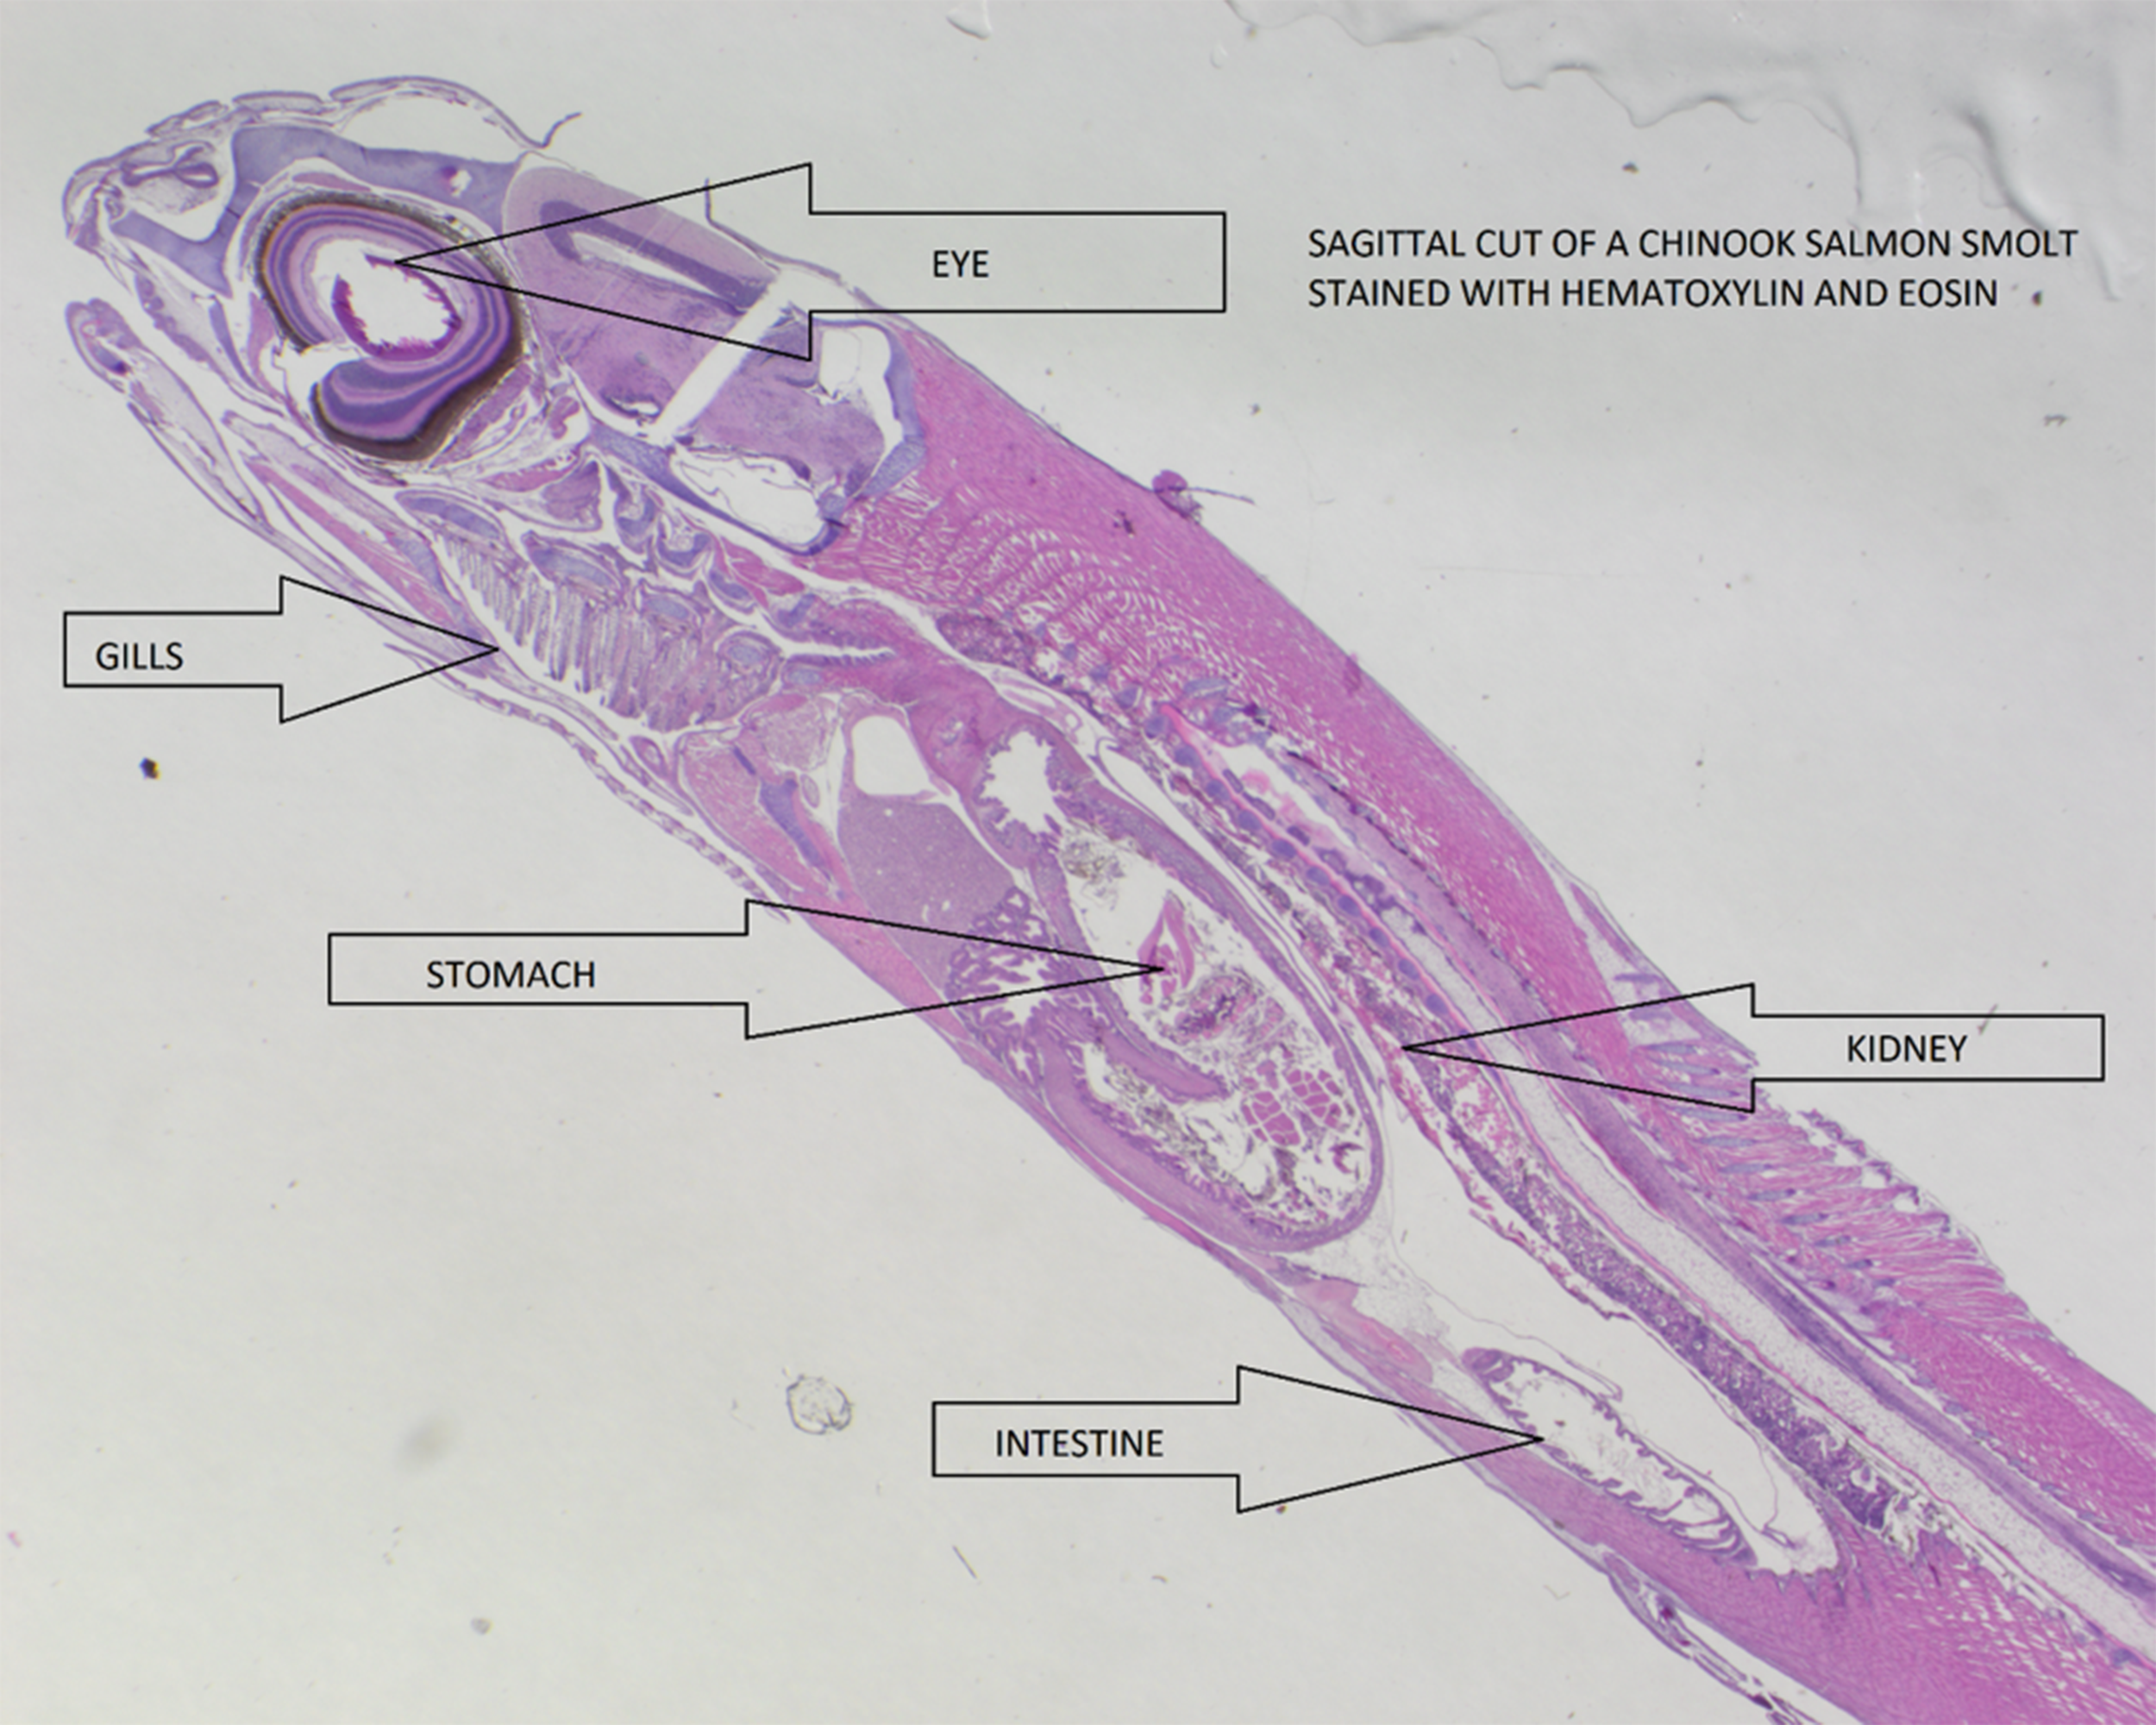 Outline of a fish, including the internal organs.  The fish has been sliced open and stained so it appears pink and purple.  The anatomy has been labeled:  eye, gills, stomach, intestine and kidney.  